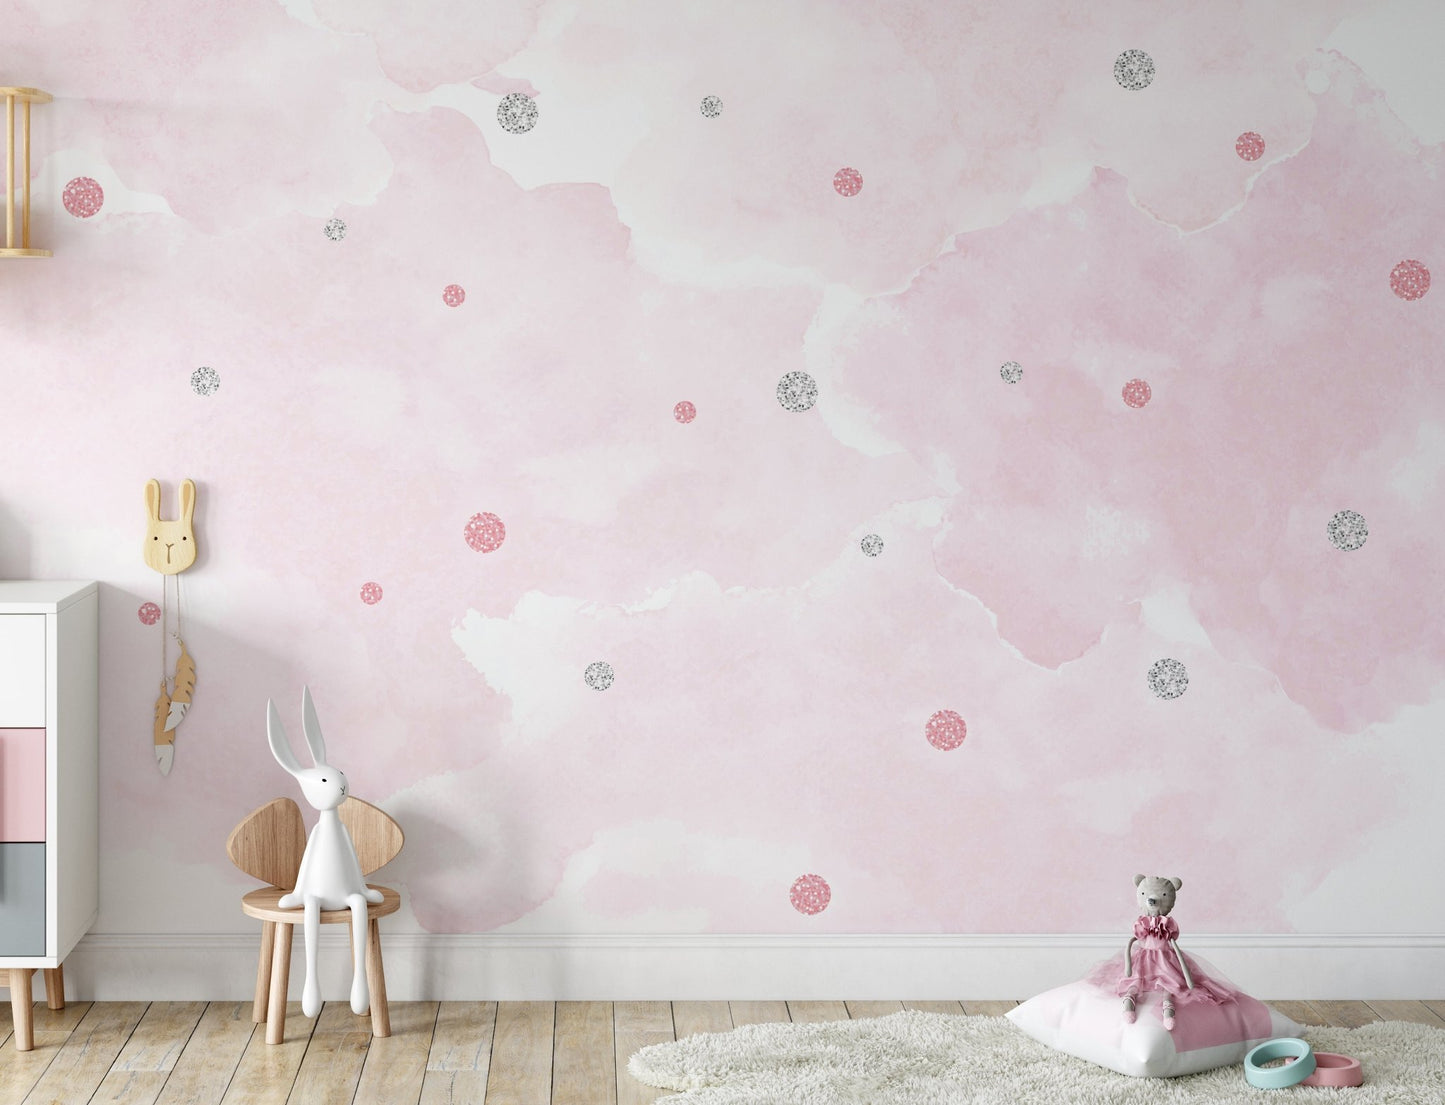 silver and pink dot glitter pattern on pink clouds background - OCP TINY THINGS